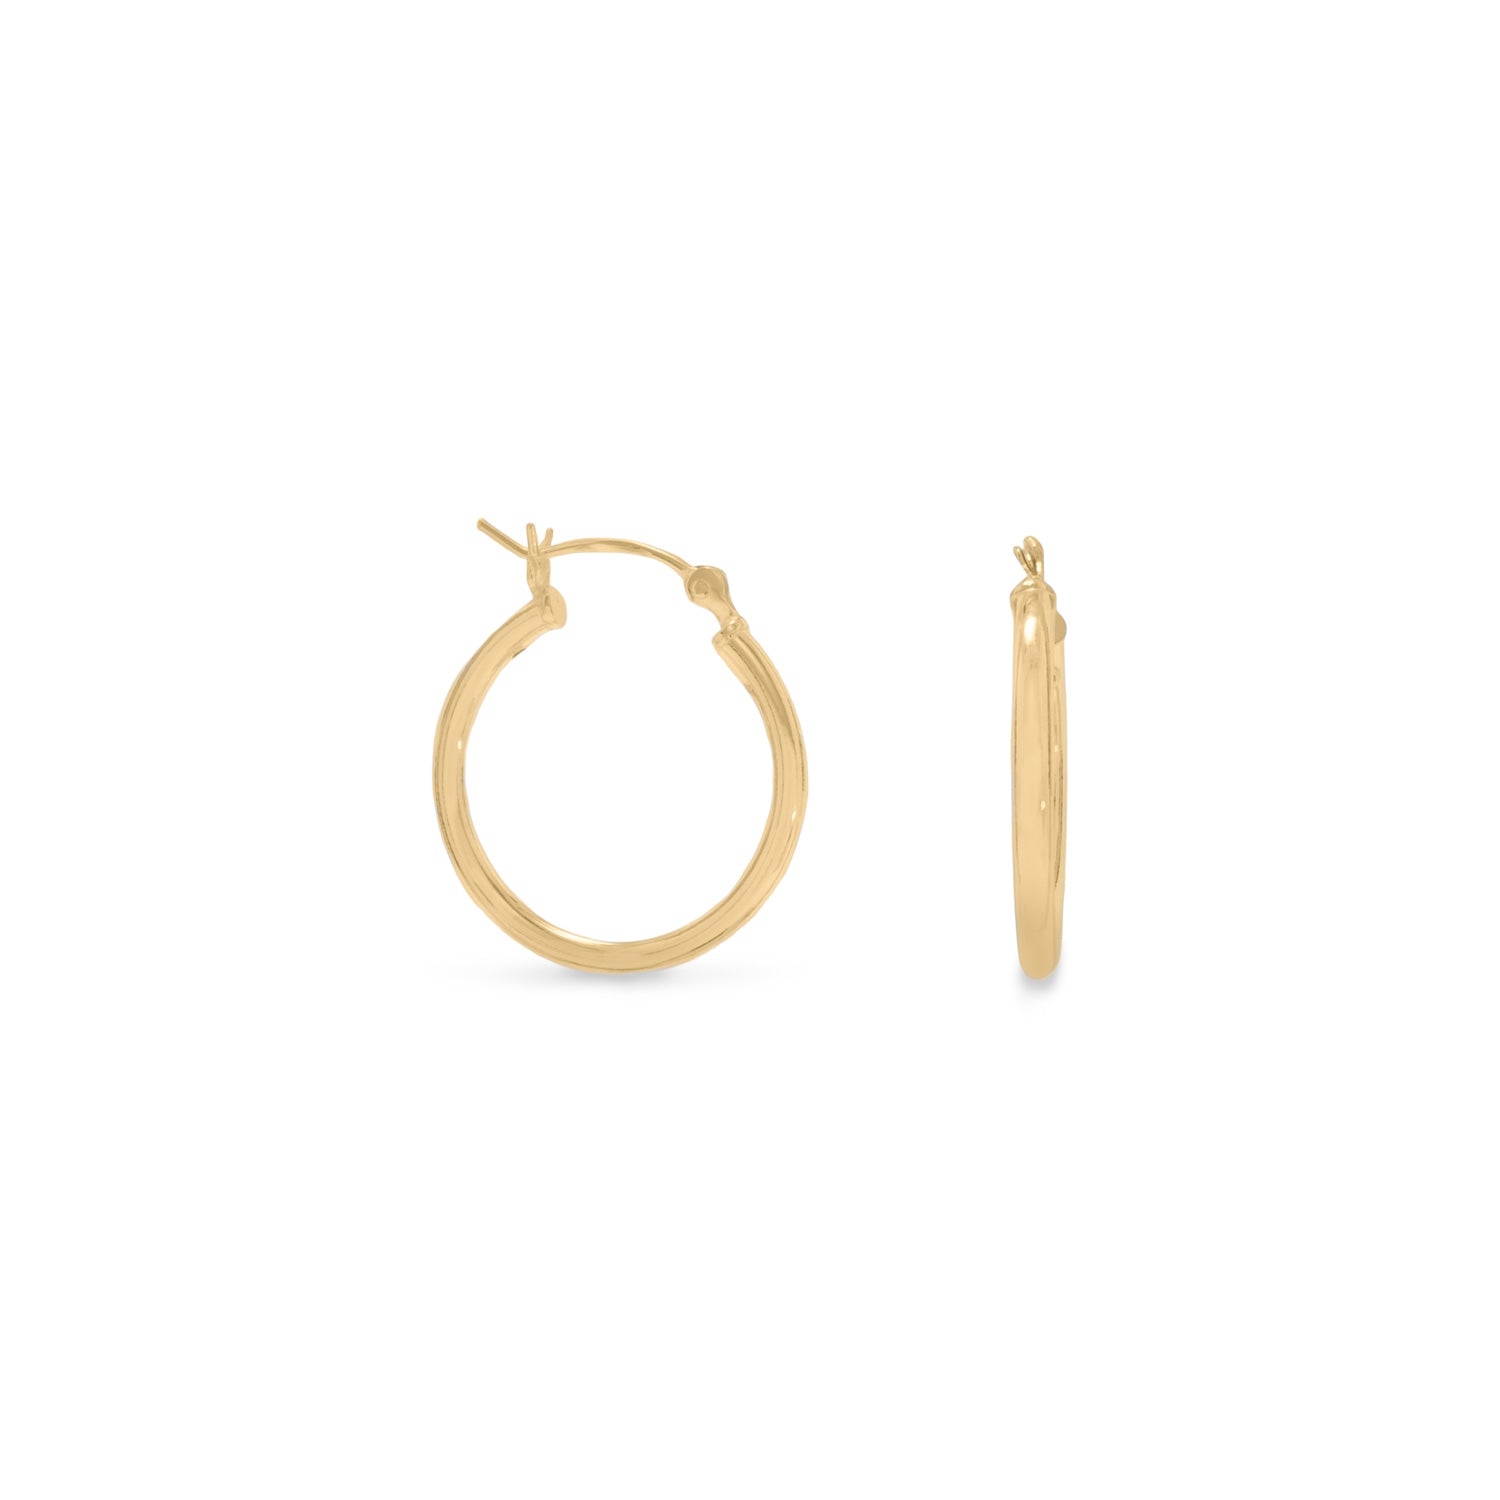 2mm x 20mm Gold Plated Click Hoop